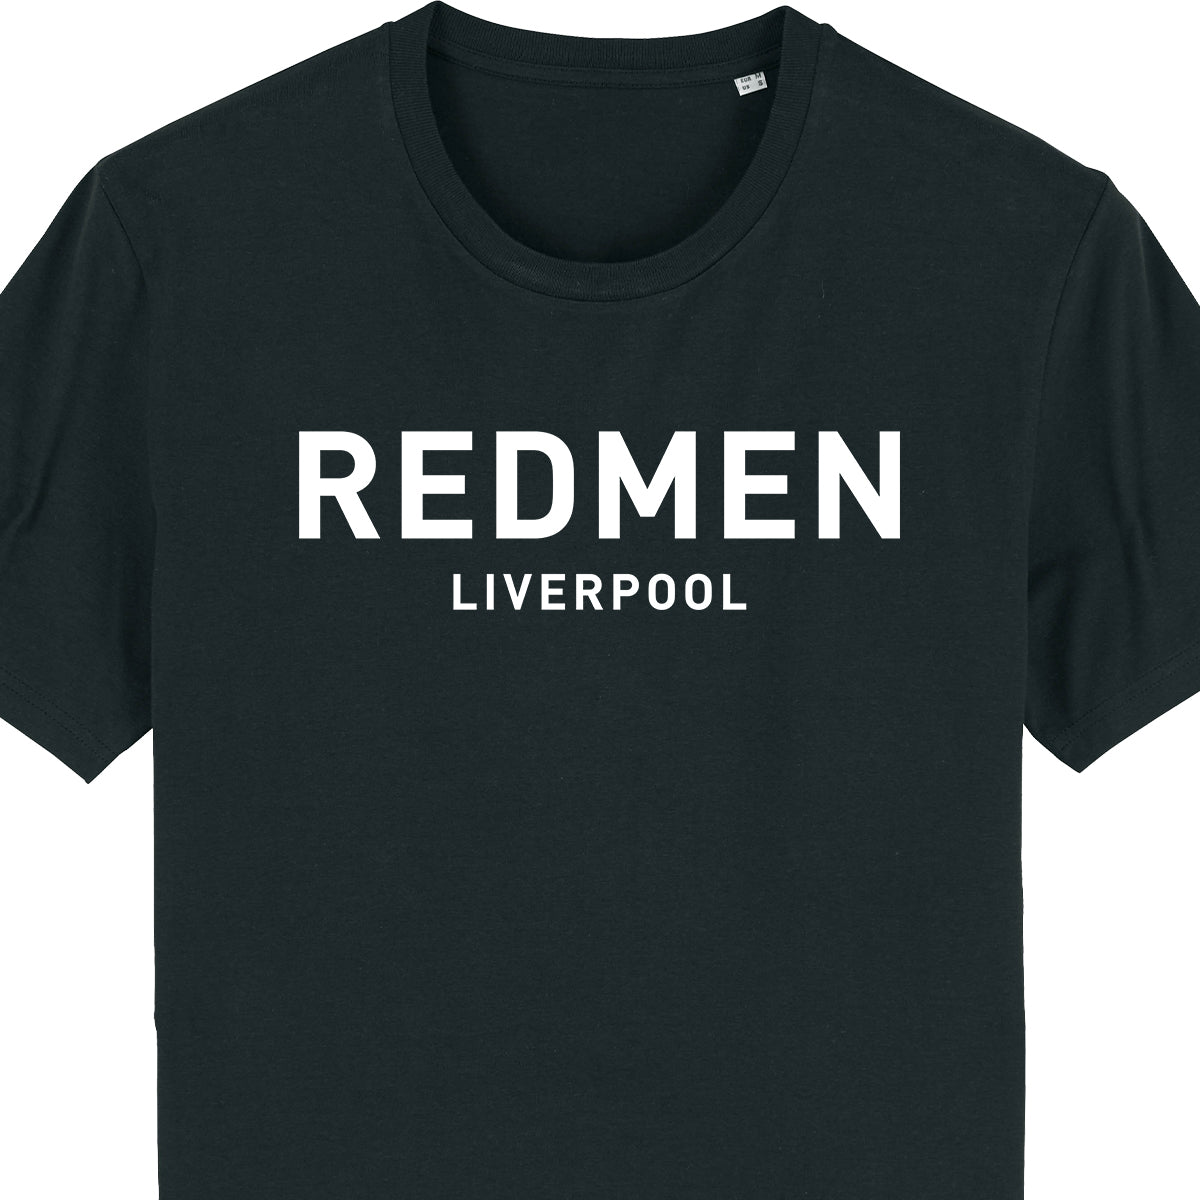 The House of Redmen Tee